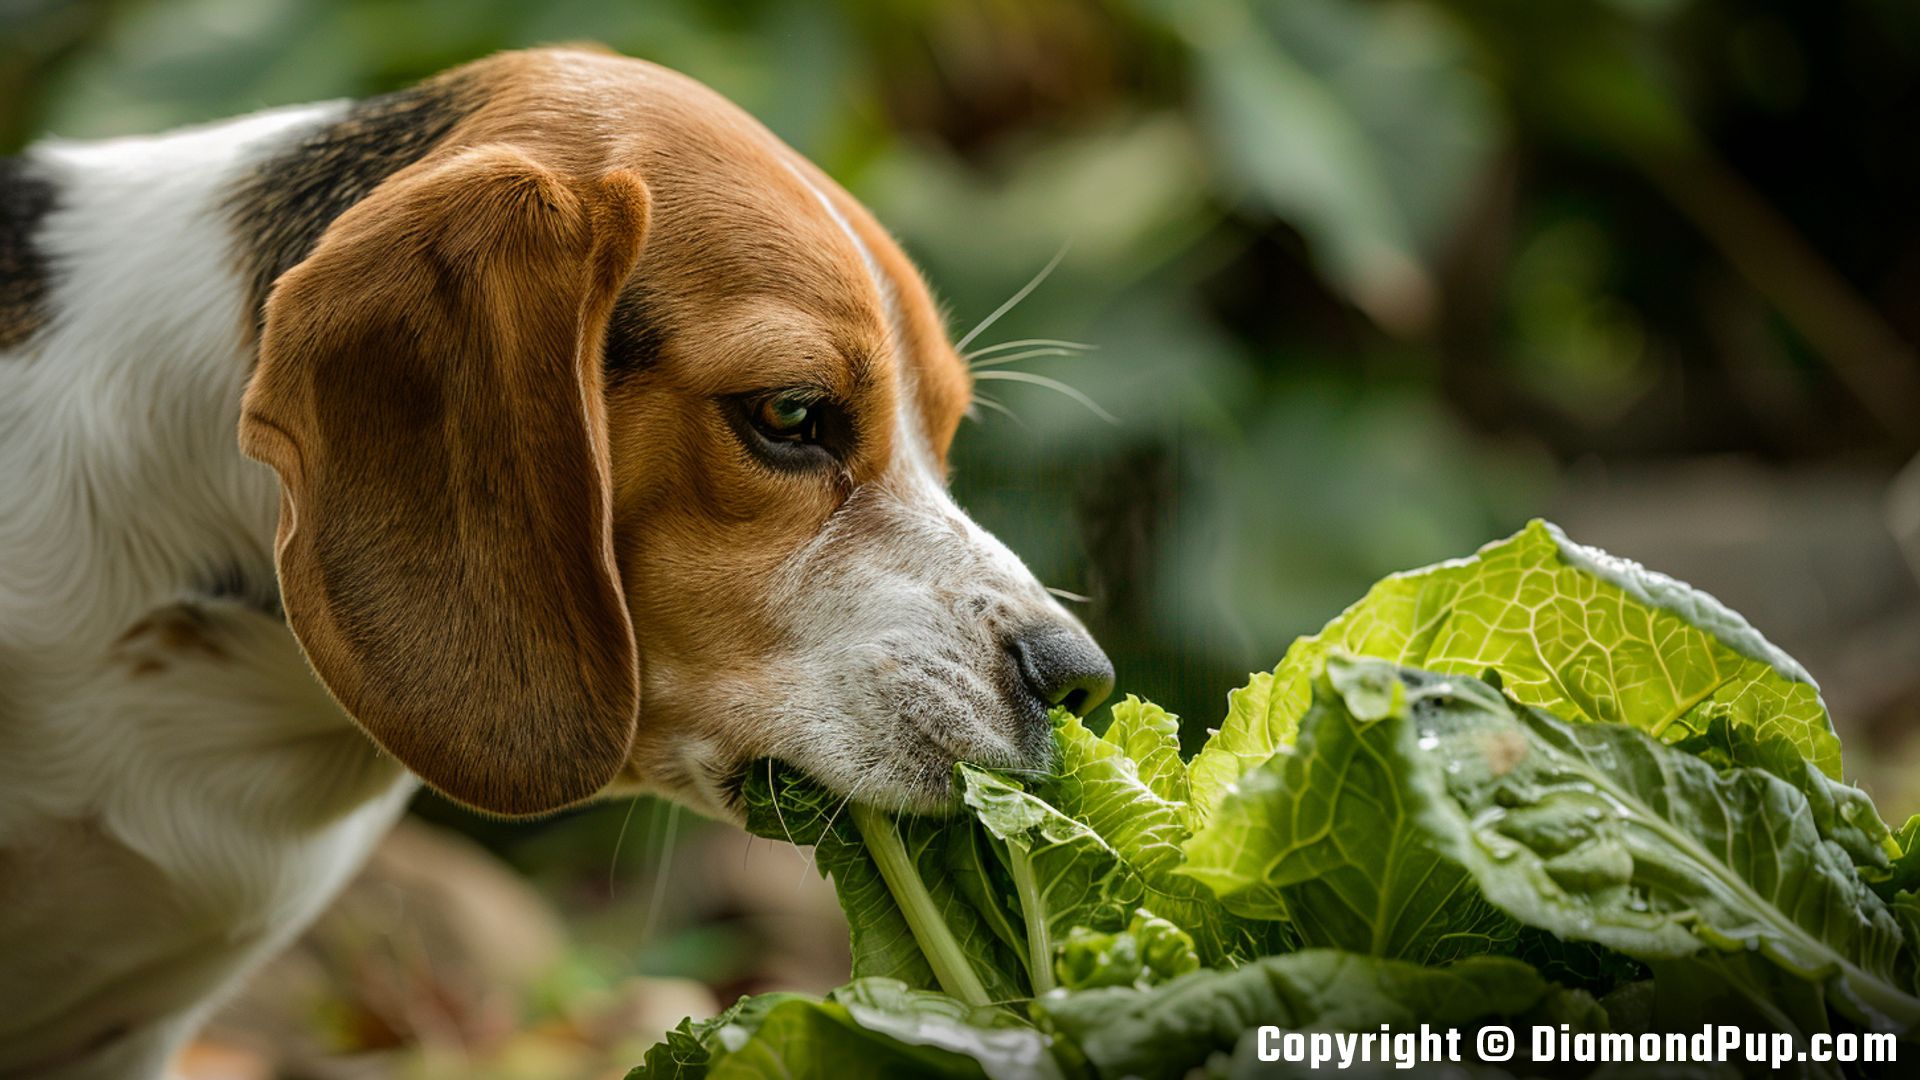 Image of a Cute Beagle Snacking on Lettuce